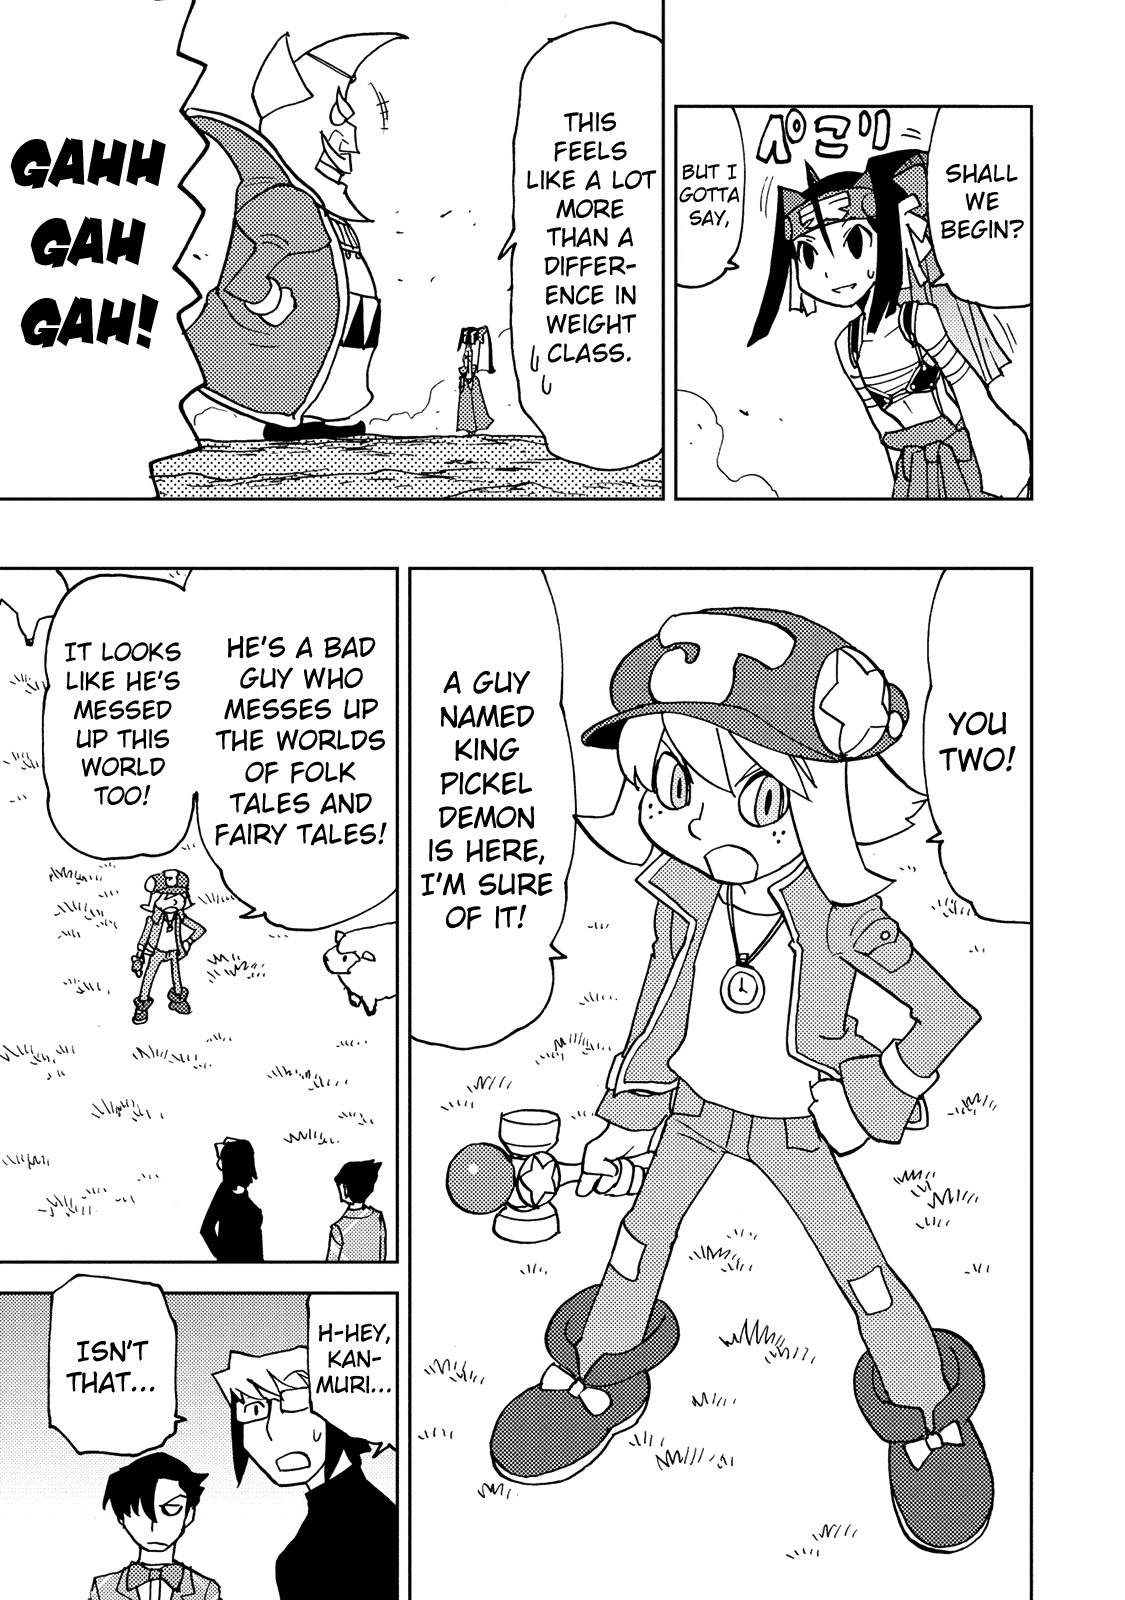 Choukadou Girl 1/6 Vol.3 Chapter 33: One New Challenger After Another!